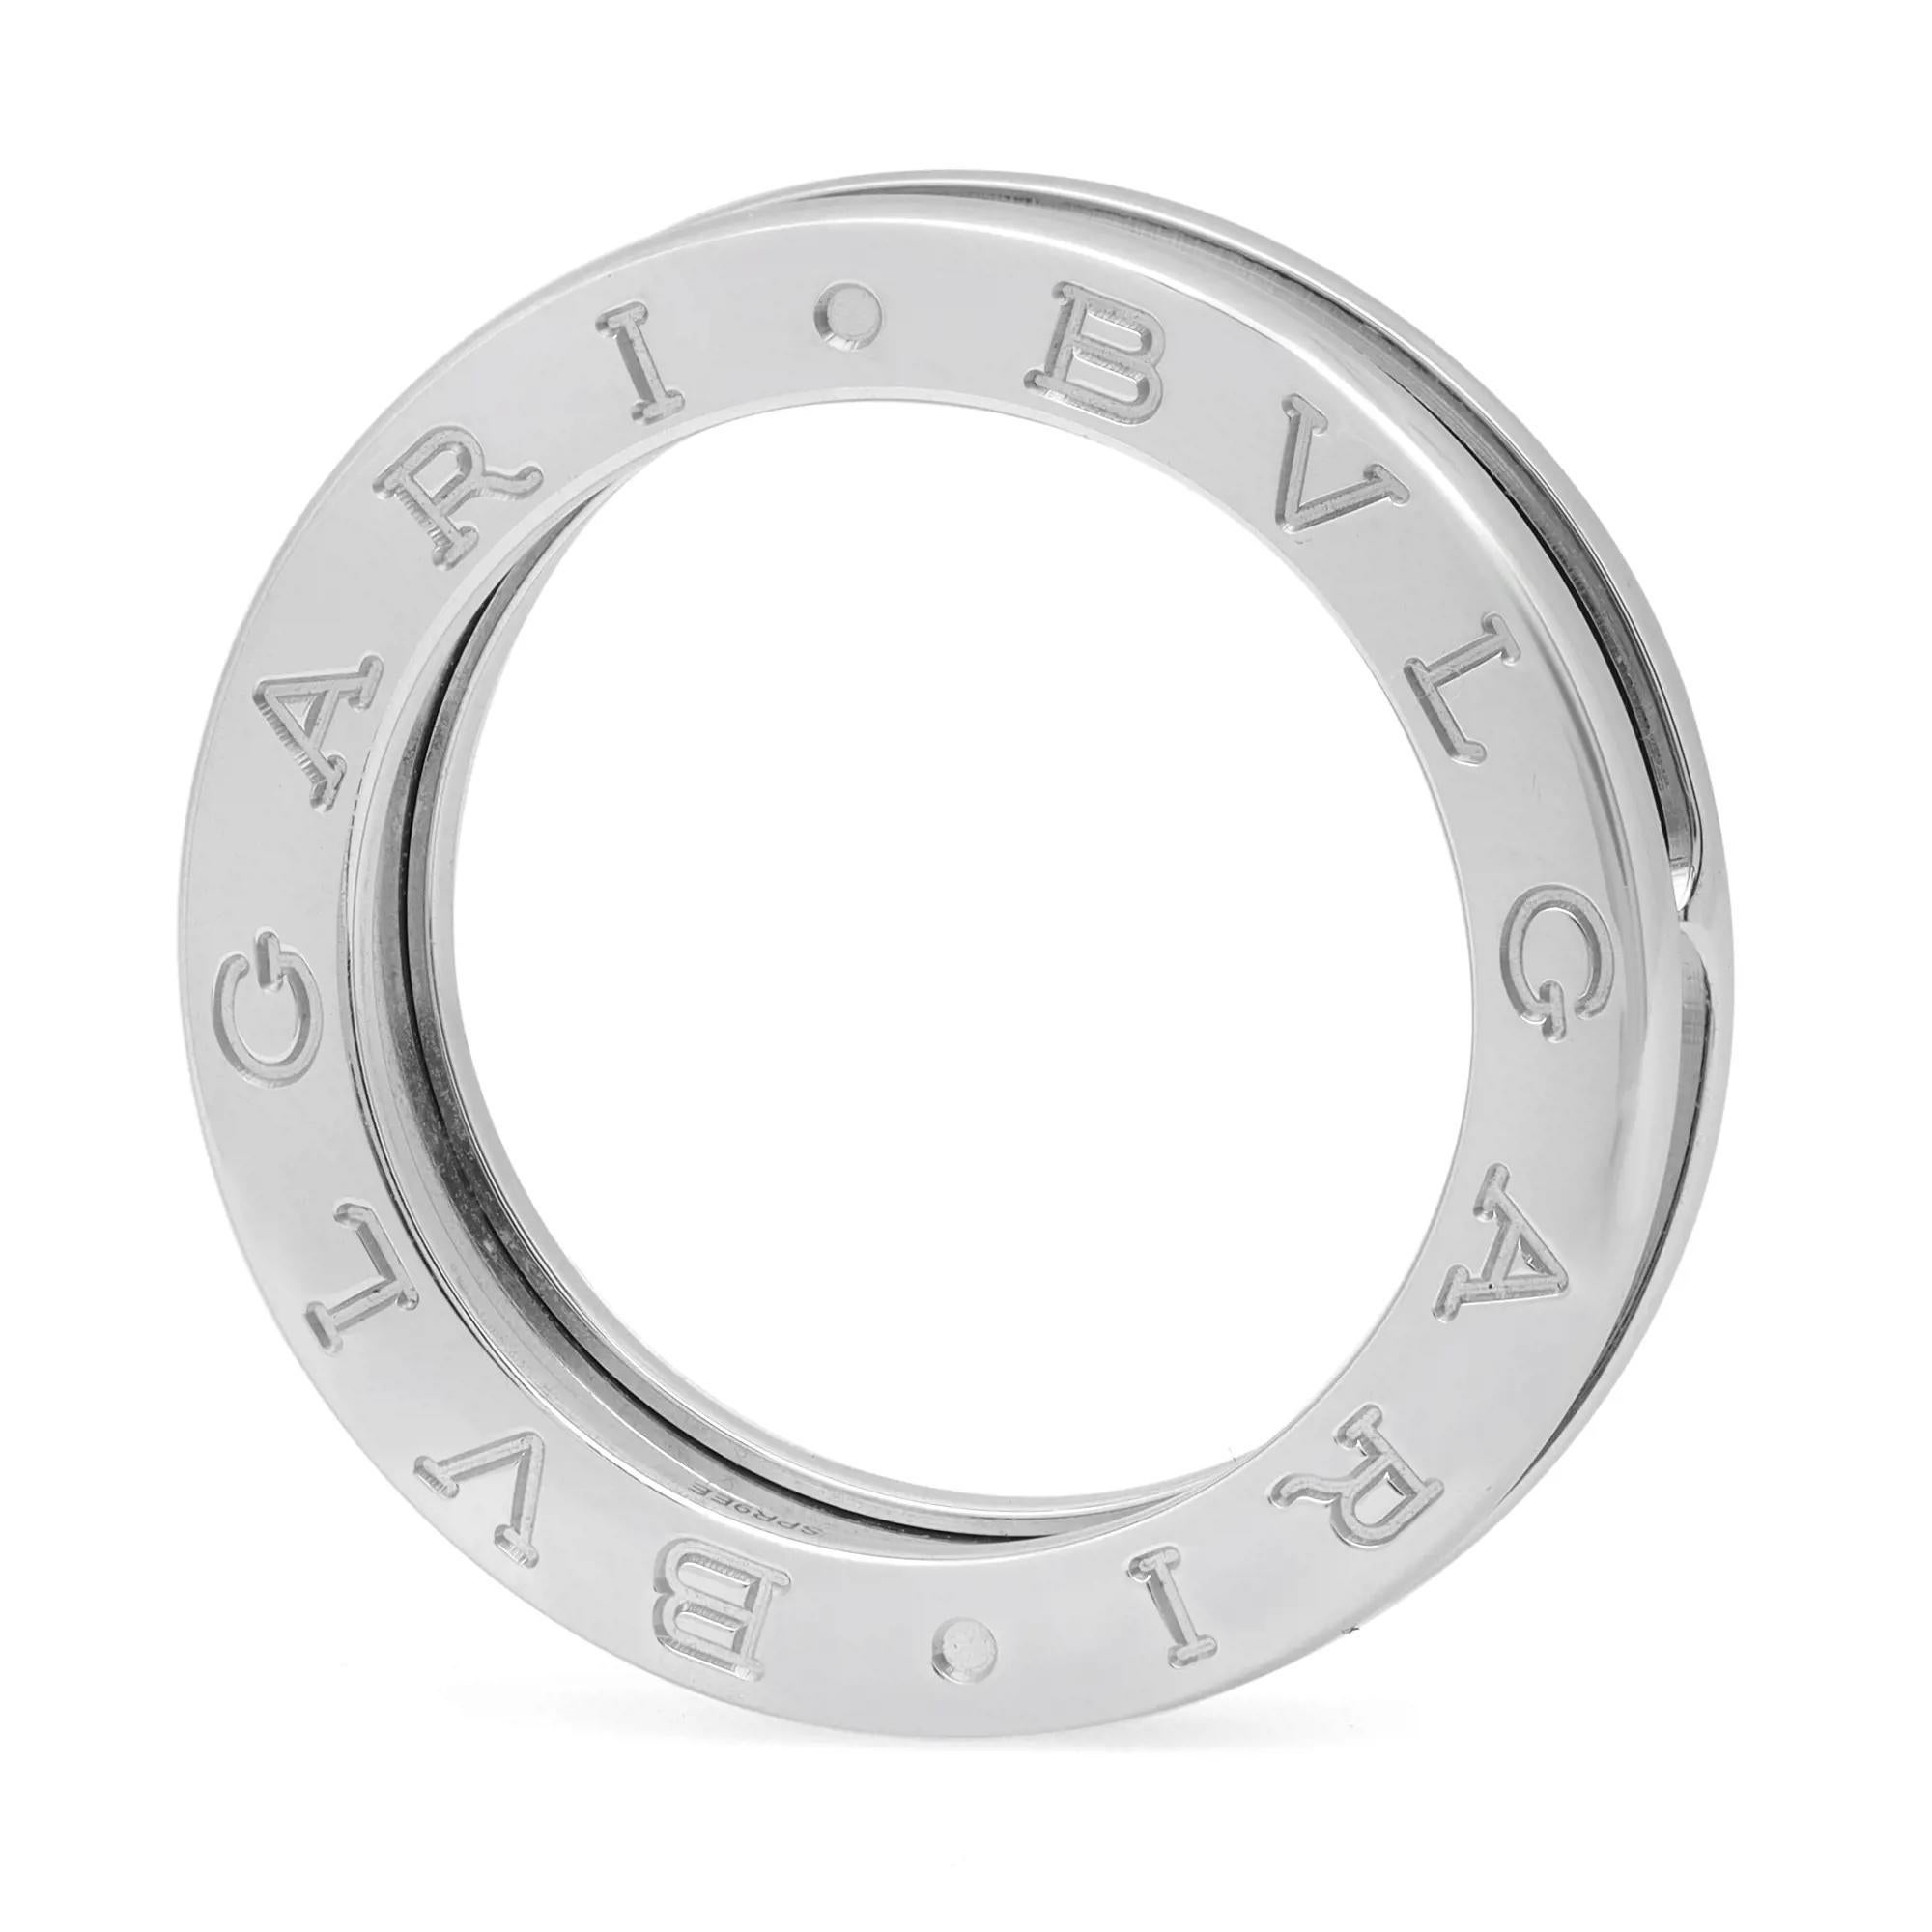 The B.Zero1 ring is a signature piece from the legendary jewelry design house Bvlgari. Crafted in fine 18K white gold. It features a clean modern one band ring engraved with the BVLGARI logo on both sides. This ring makes a great timeless and modern